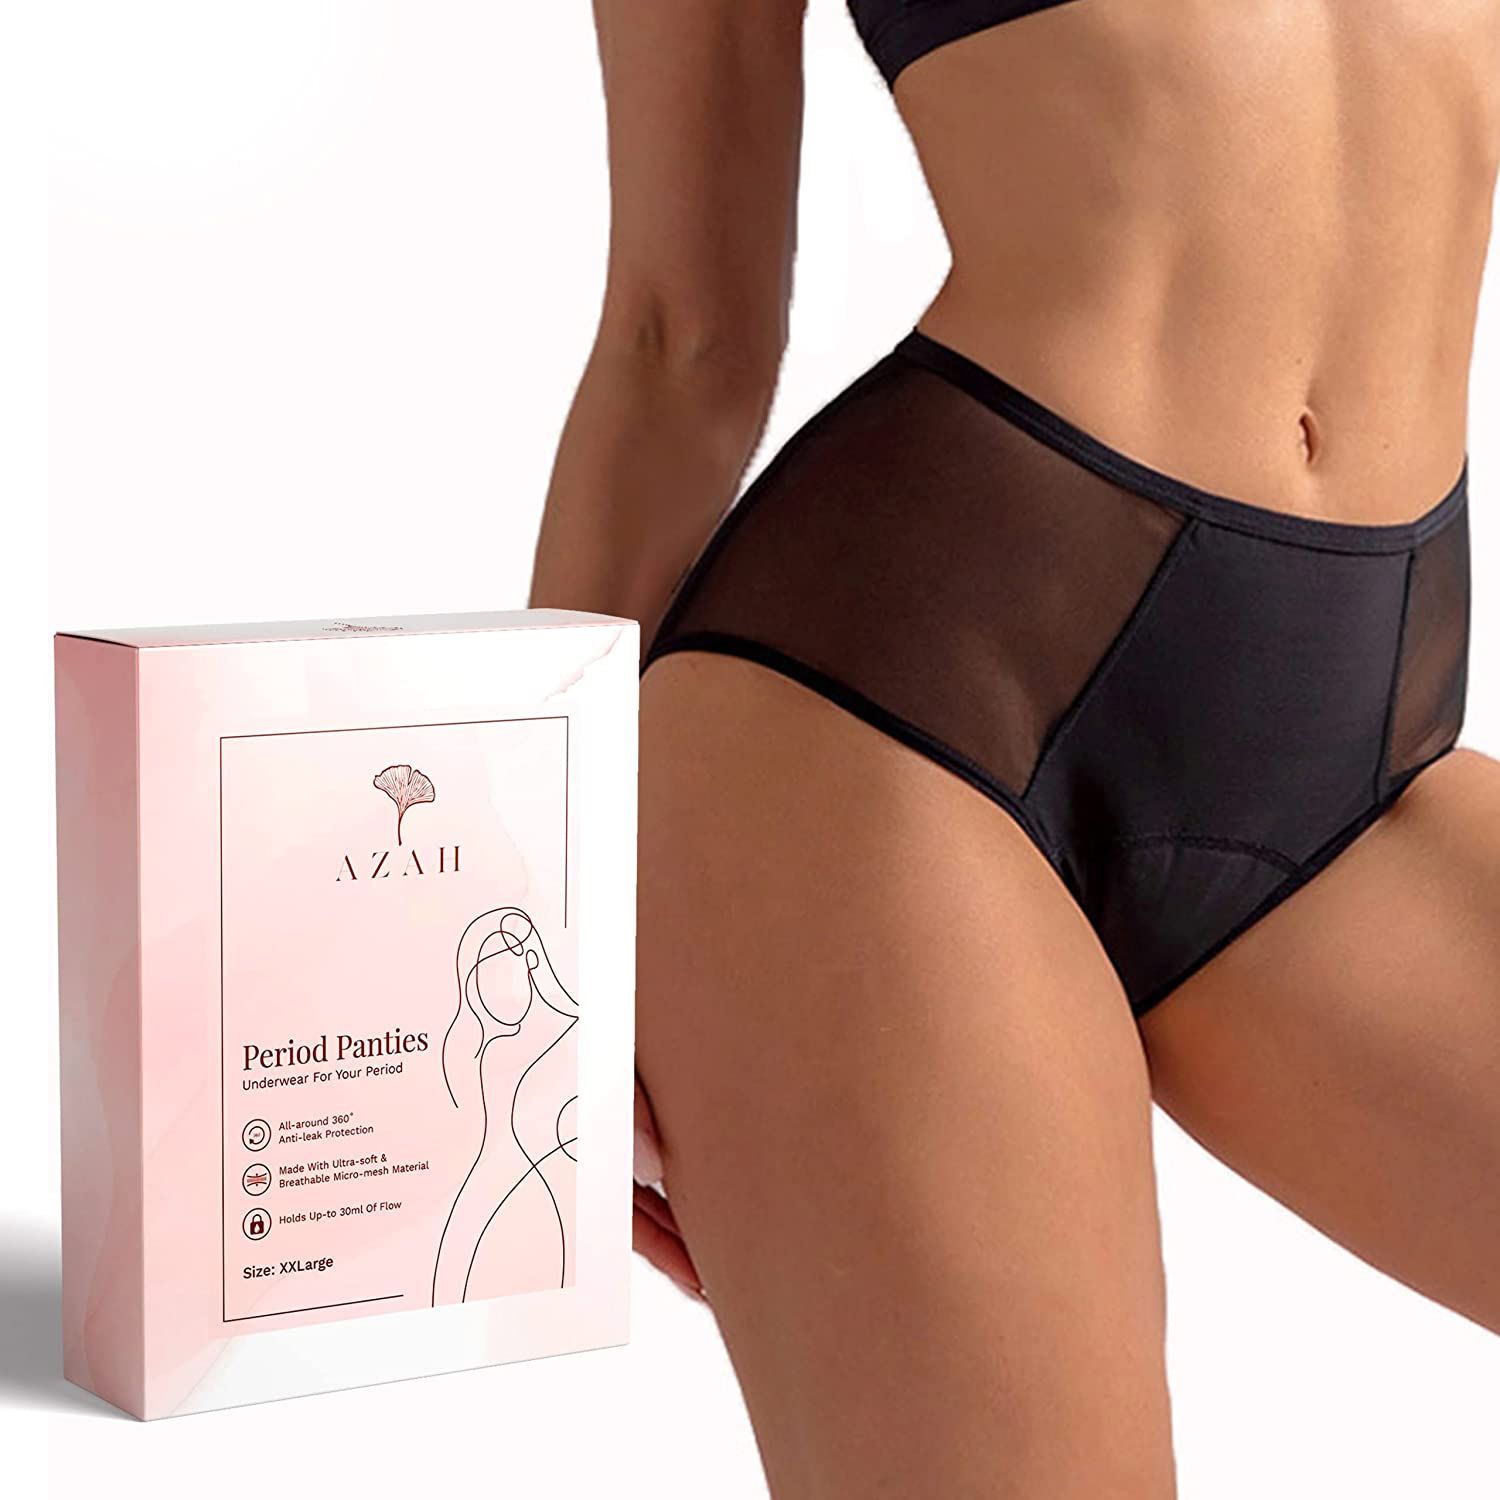 Azah Period Panties for Women - Size XX-Large | Leak Proof Protection | Breathable Panties